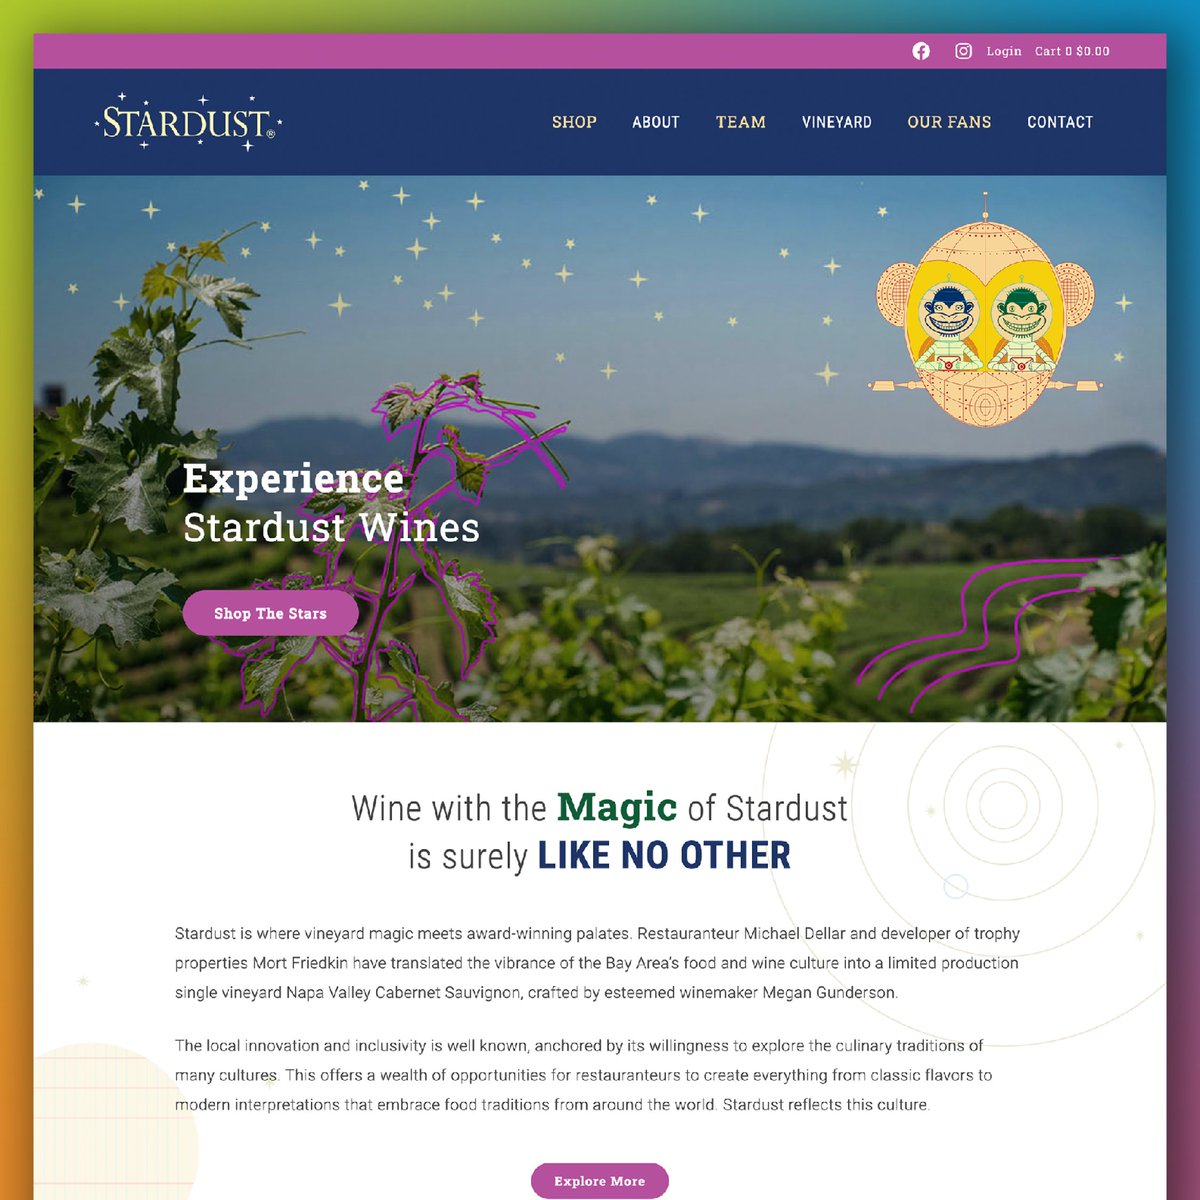 Exciting news: Our new website for Stardust Cabernet Sauvignon is LIVE! They embrace their weird, and hey, we can totally relate. Take a cosmic trip with Stardust at stardustwines.com. It's a colorful and wonderful journey!